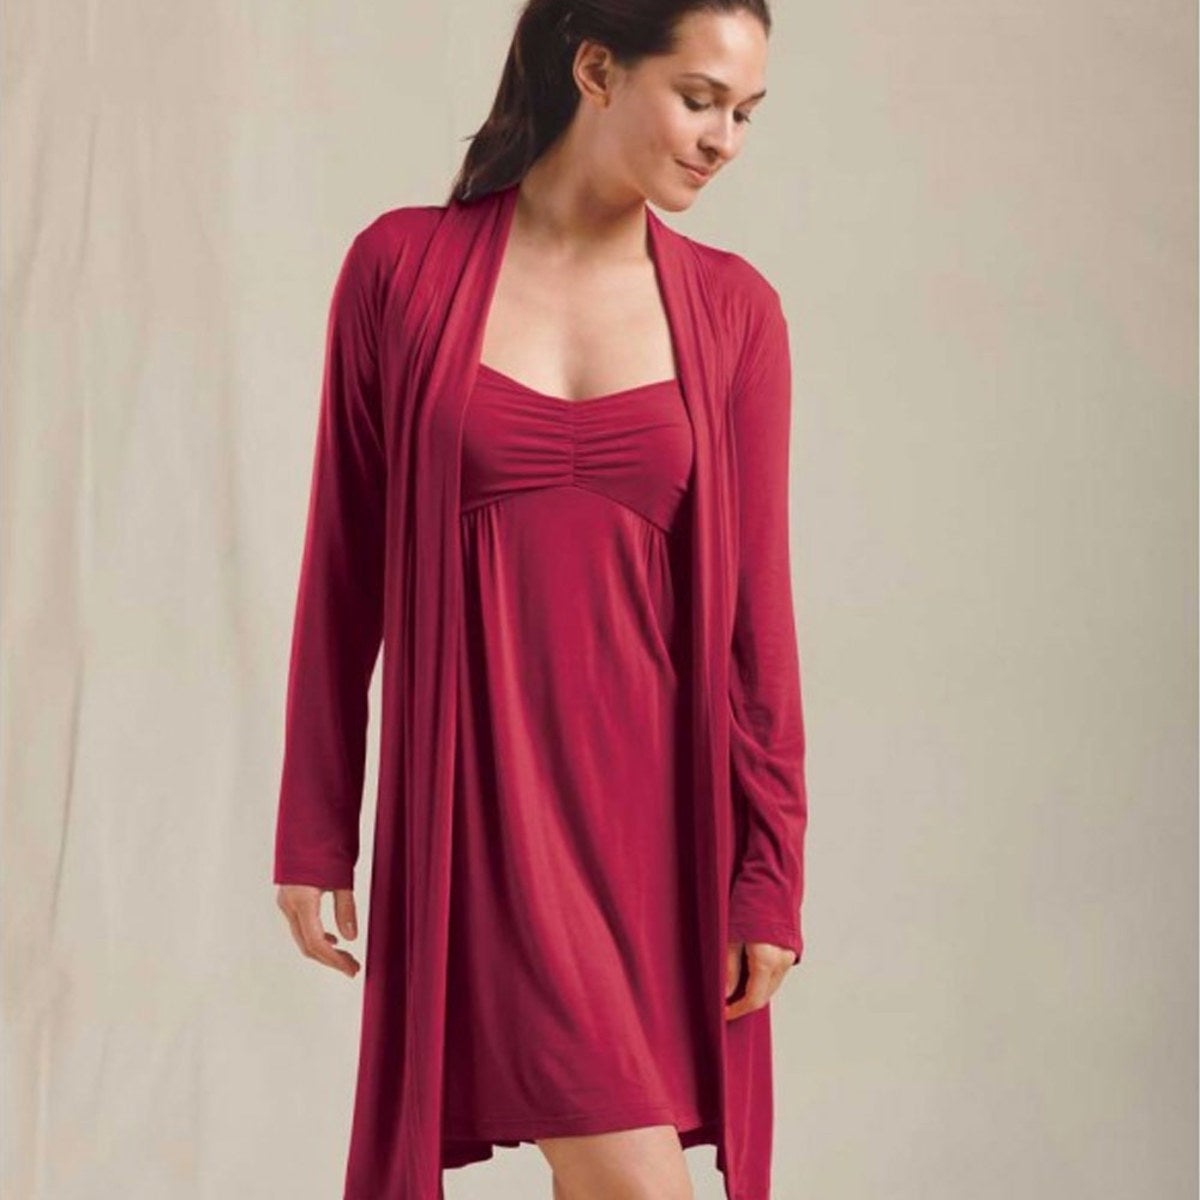 Eco-Weave Long-Sleeved Knee-Length Robe - Lily Wood - S-M (4-8)